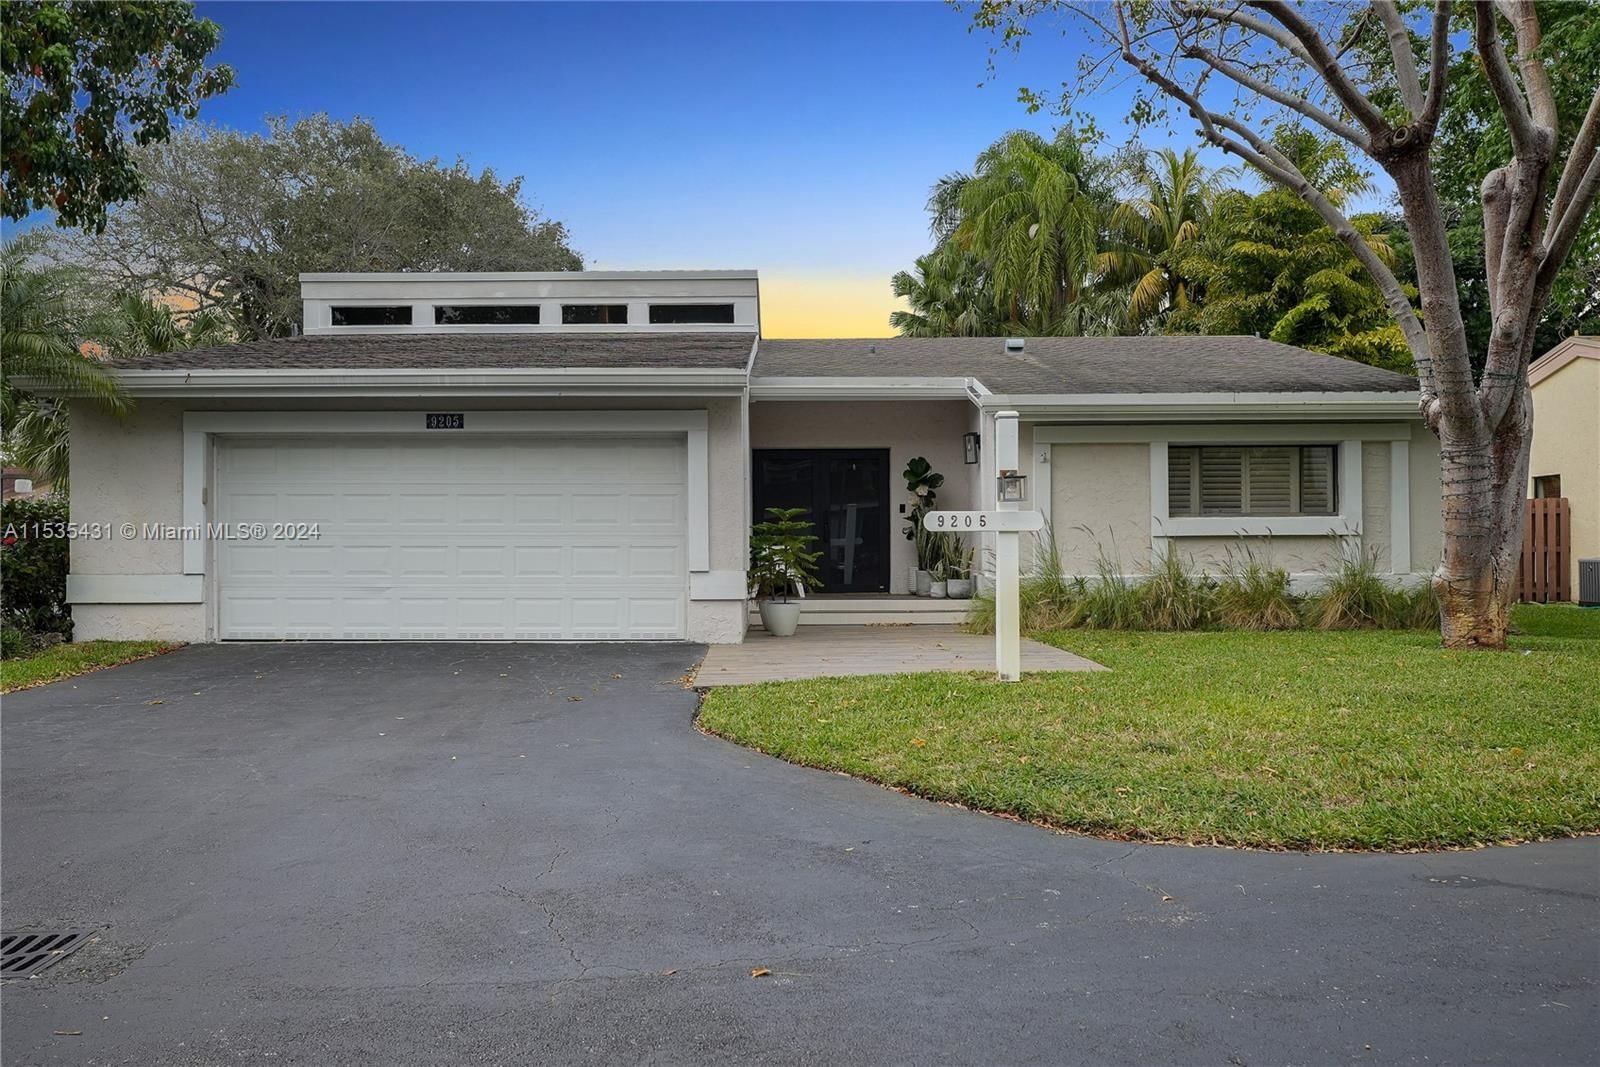 Real estate property located at 9205 78th Ct, Miami-Dade County, PEPPERWOOD, Miami, FL